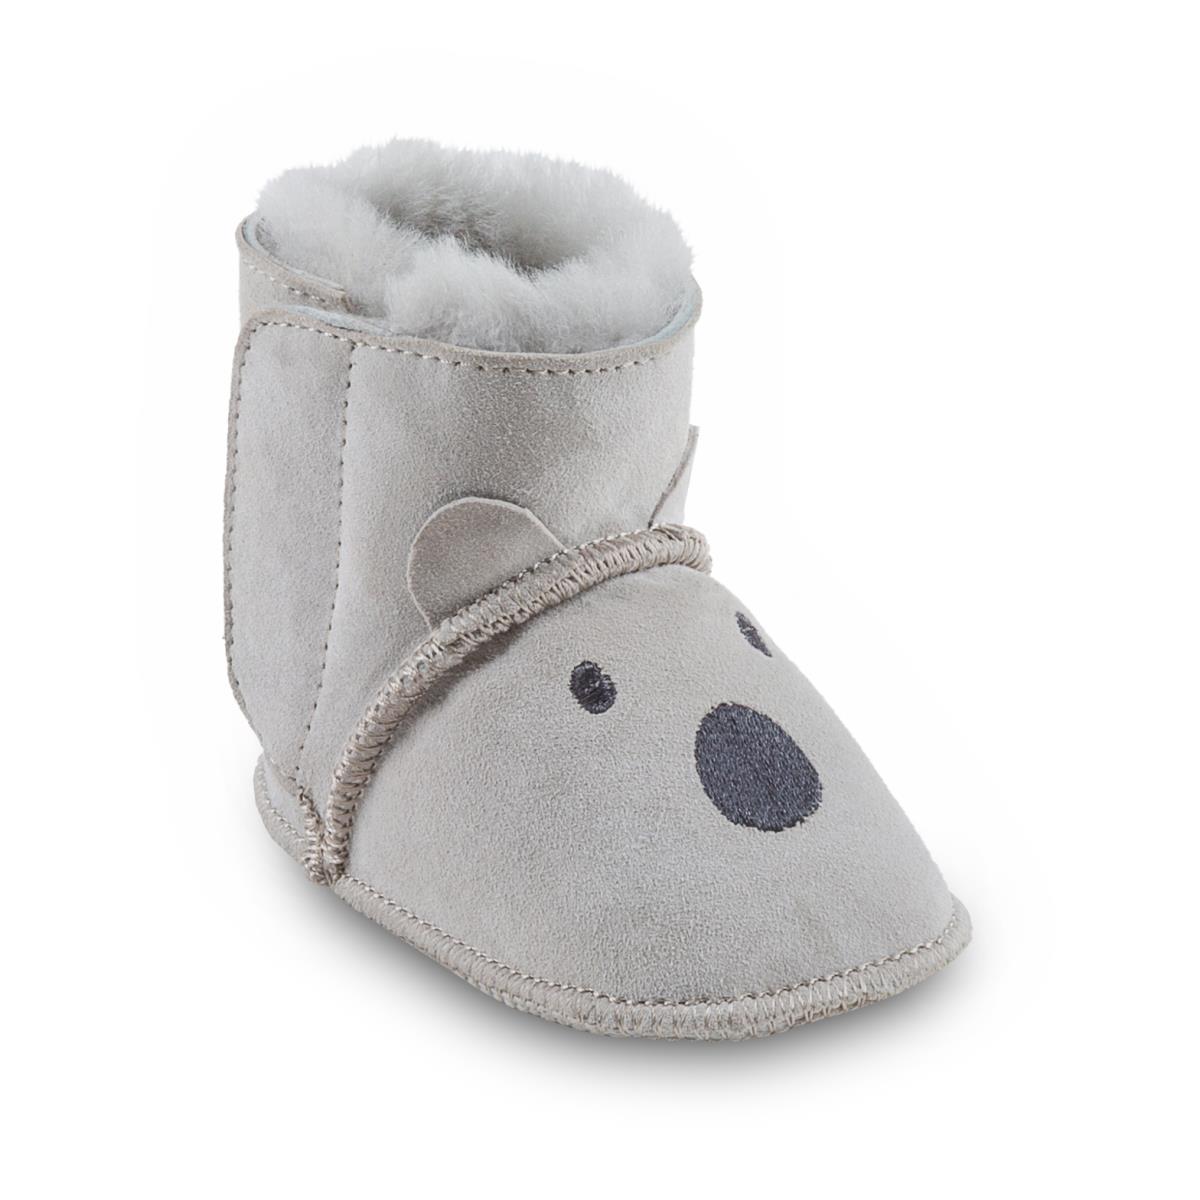 Babies Sidney Sheepskin Booties | Just Sheepskin Slippers and Boots